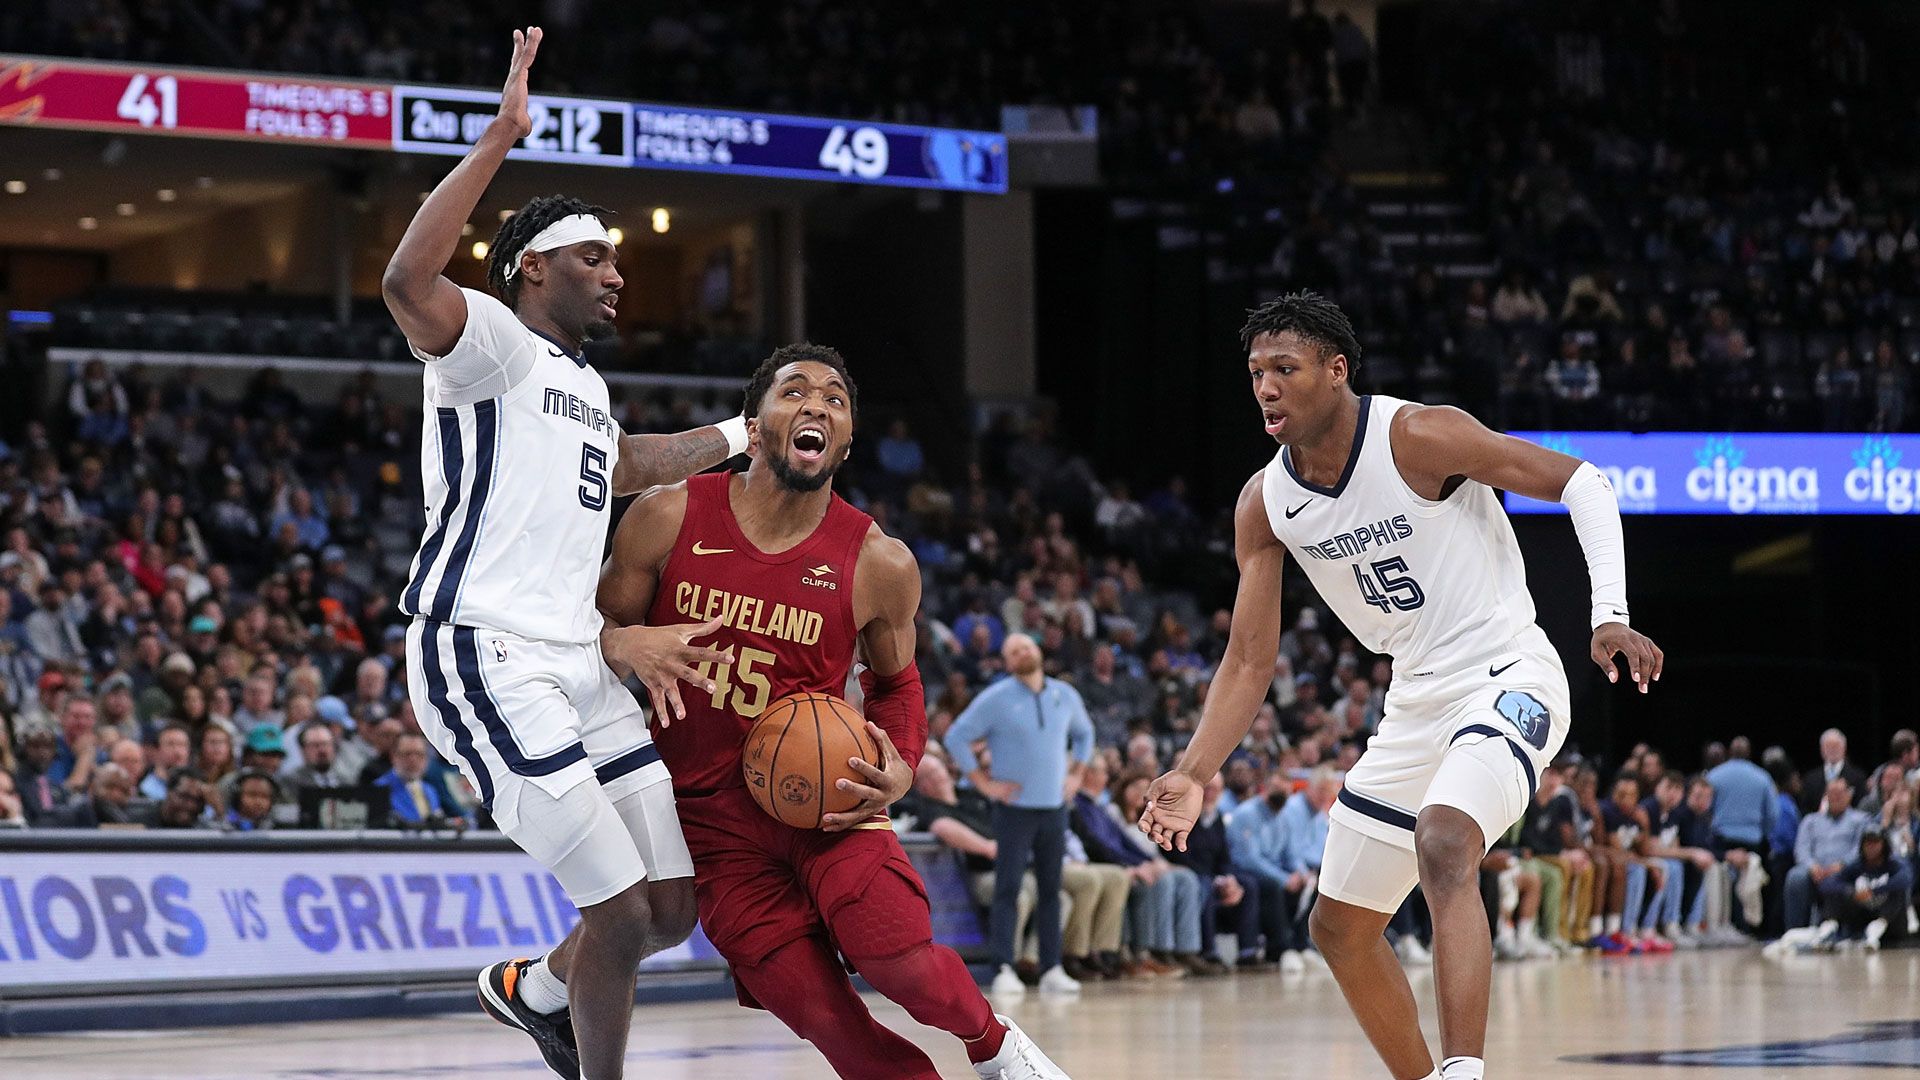 MEMPHIS, TENNESSEE - FEBRUARY 01: Donovan Mitchell #45 of the Cleveland Cavaliers handles the ball between Vince Williams Jr. #5 of the Memphis Grizzlies and GG Jackson #45 of the Memphis Grizzlies during the game at FedExForum on February 01, 2024 in Memphis, Tennessee.